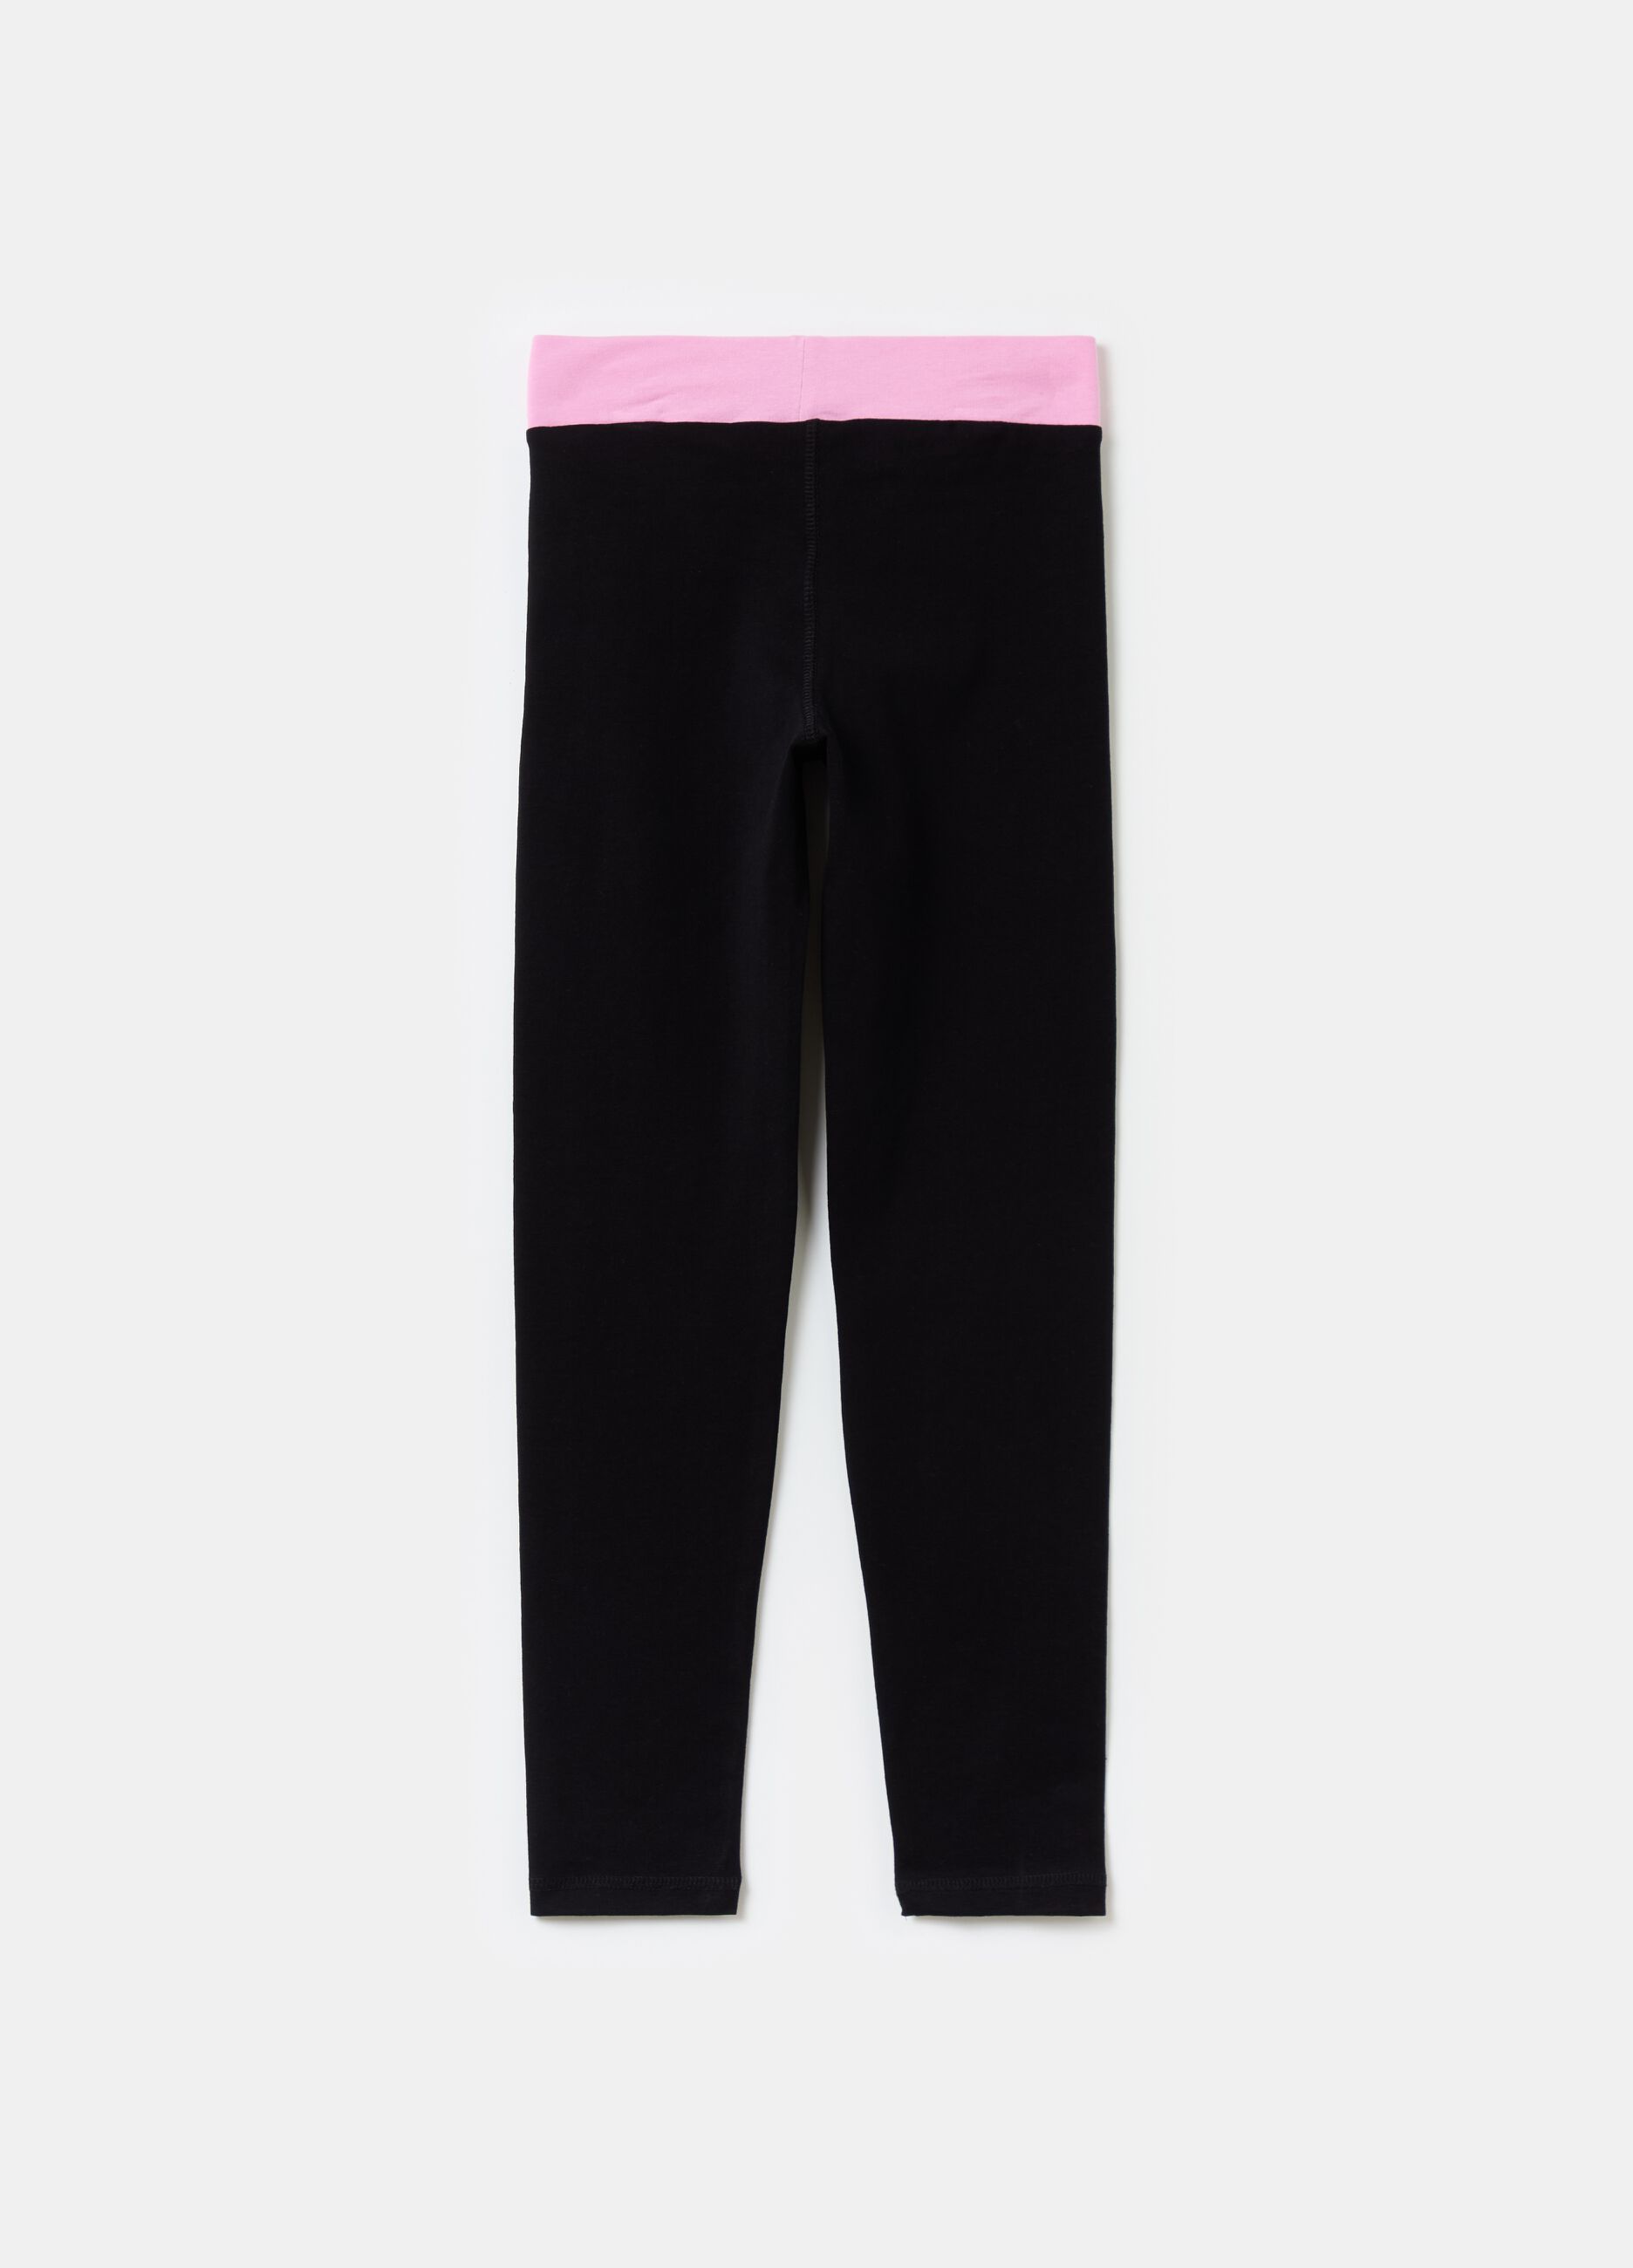 Leggings with contrasting waist